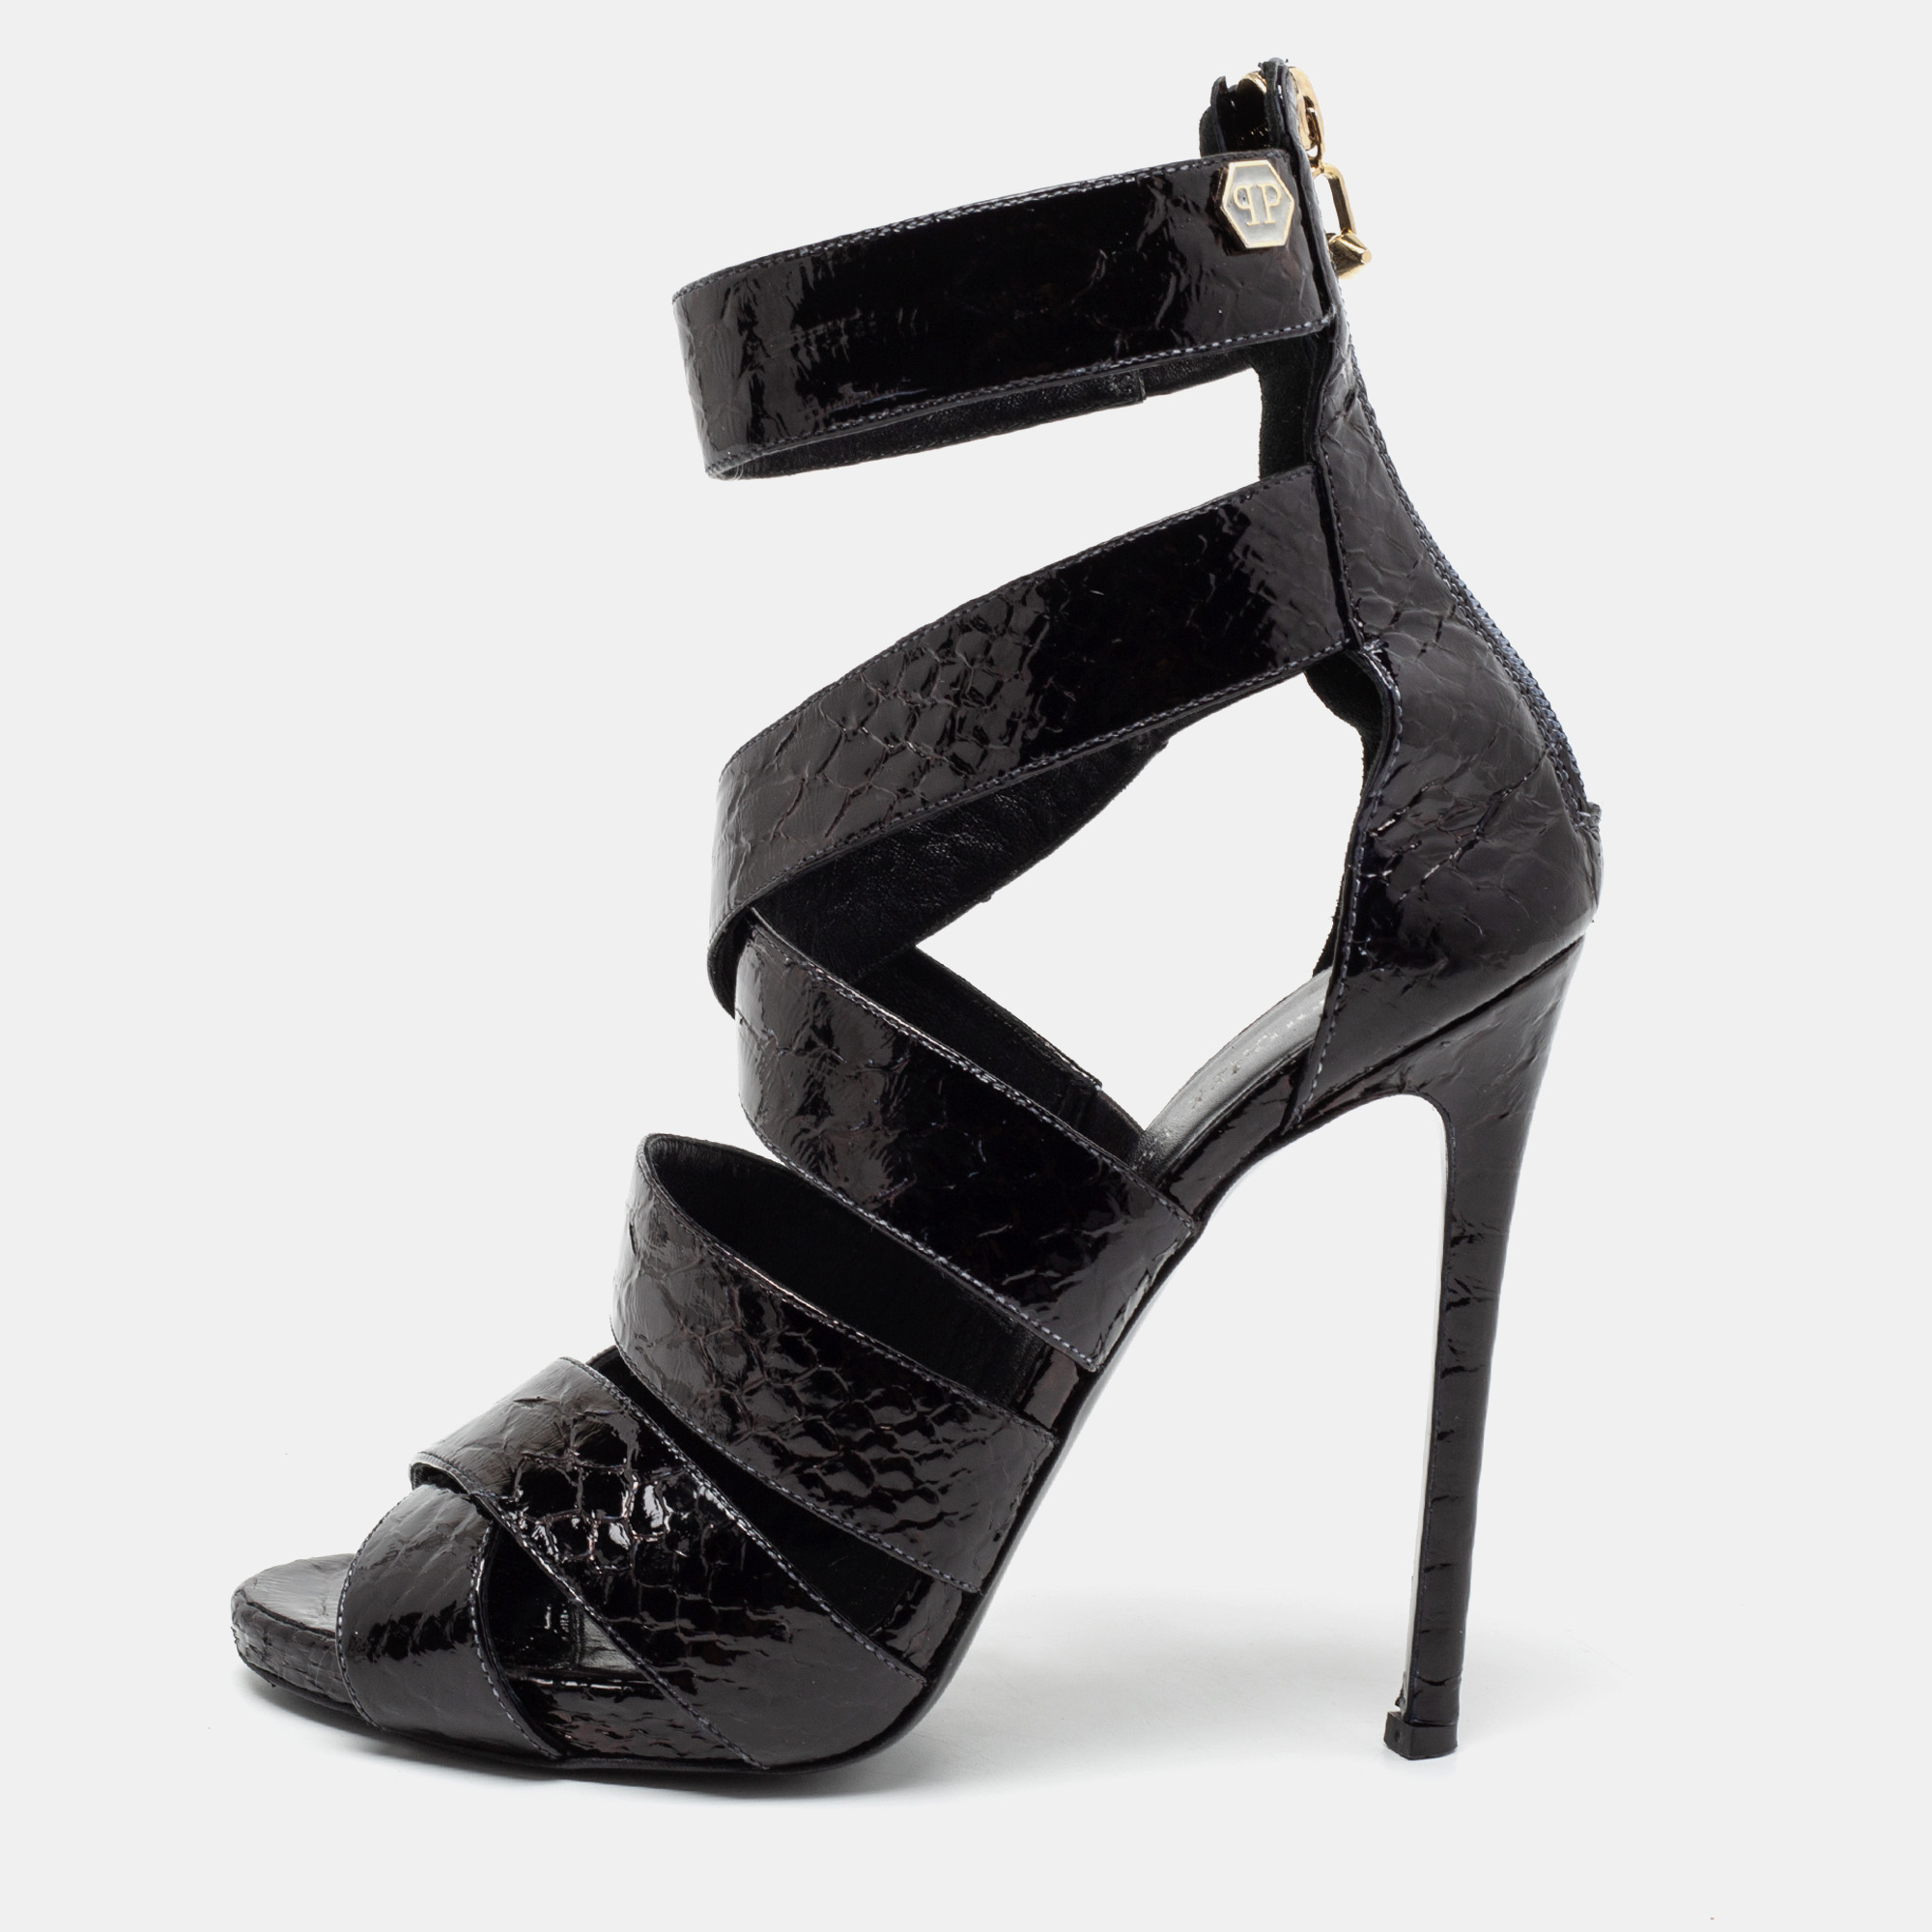 Pre-owned Philipp Plein Black Python Embossed Leather Strappy Sandals Size 38